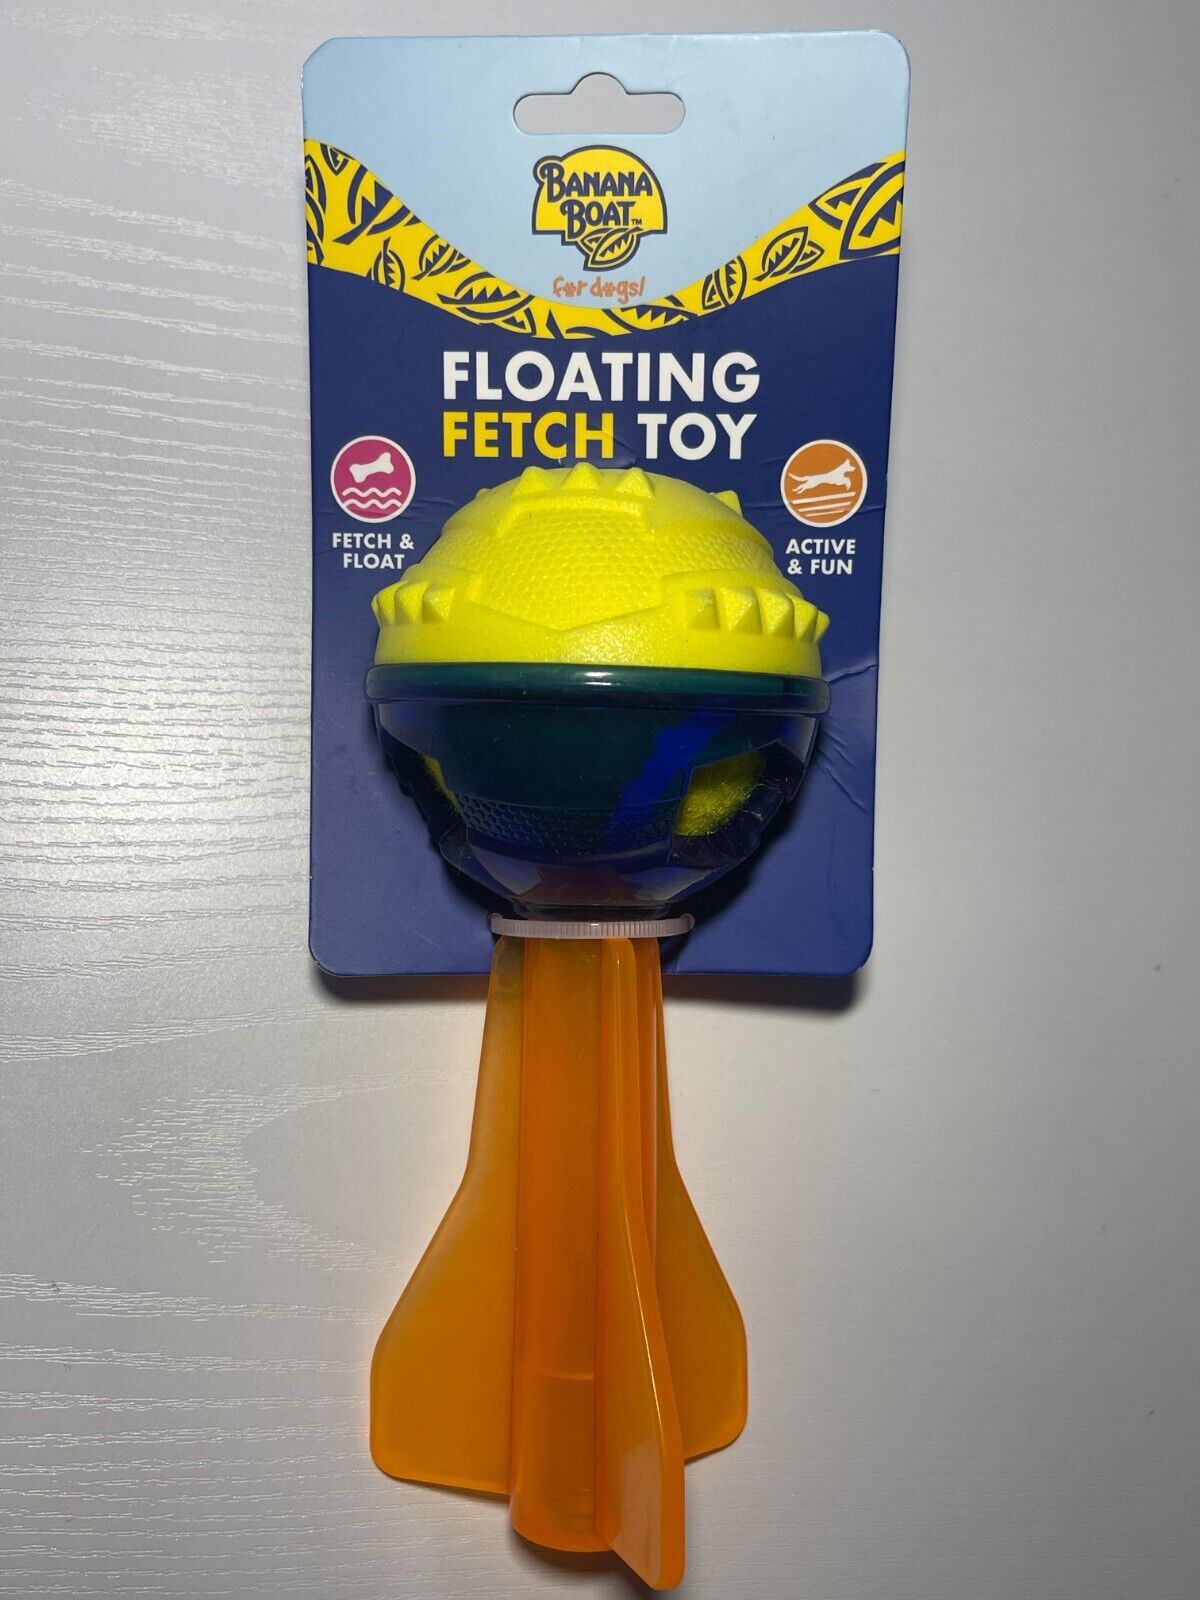 Banana Boat for Dogs Floating Fetch Toy